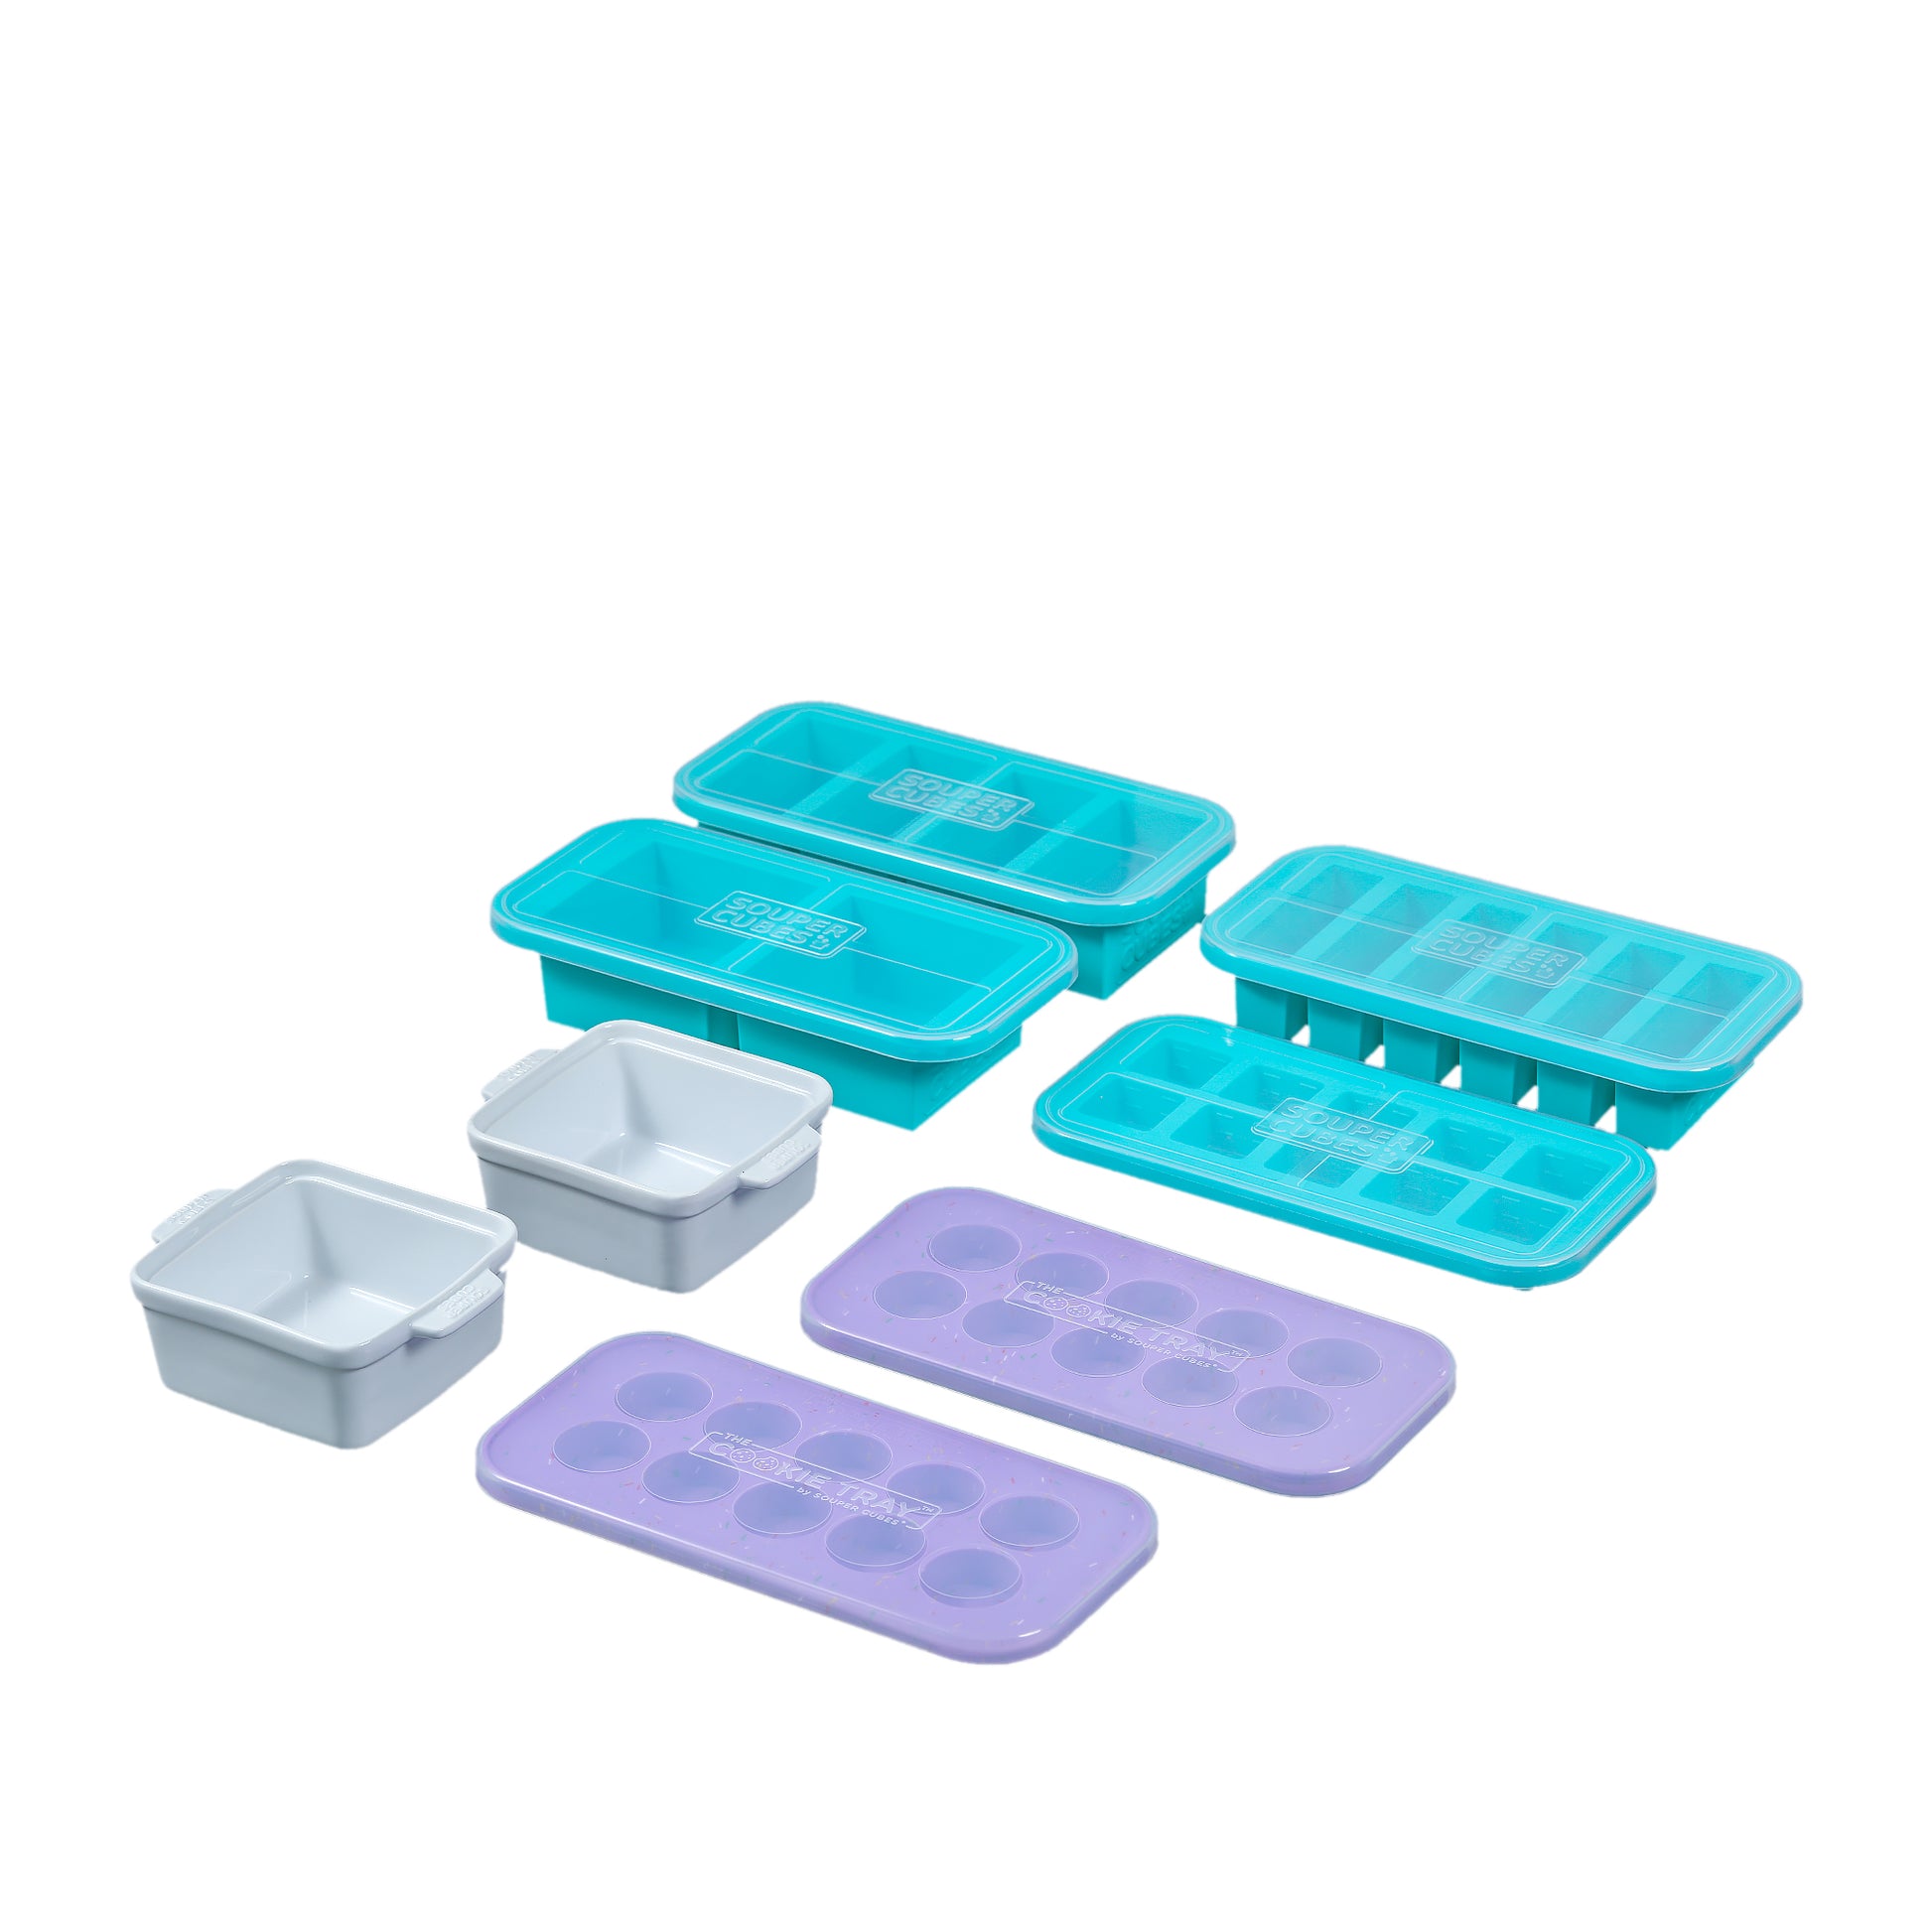 Kinggrand Kitchen 1-Cup Silicone Freezer Tray with Lid - 1 Pack